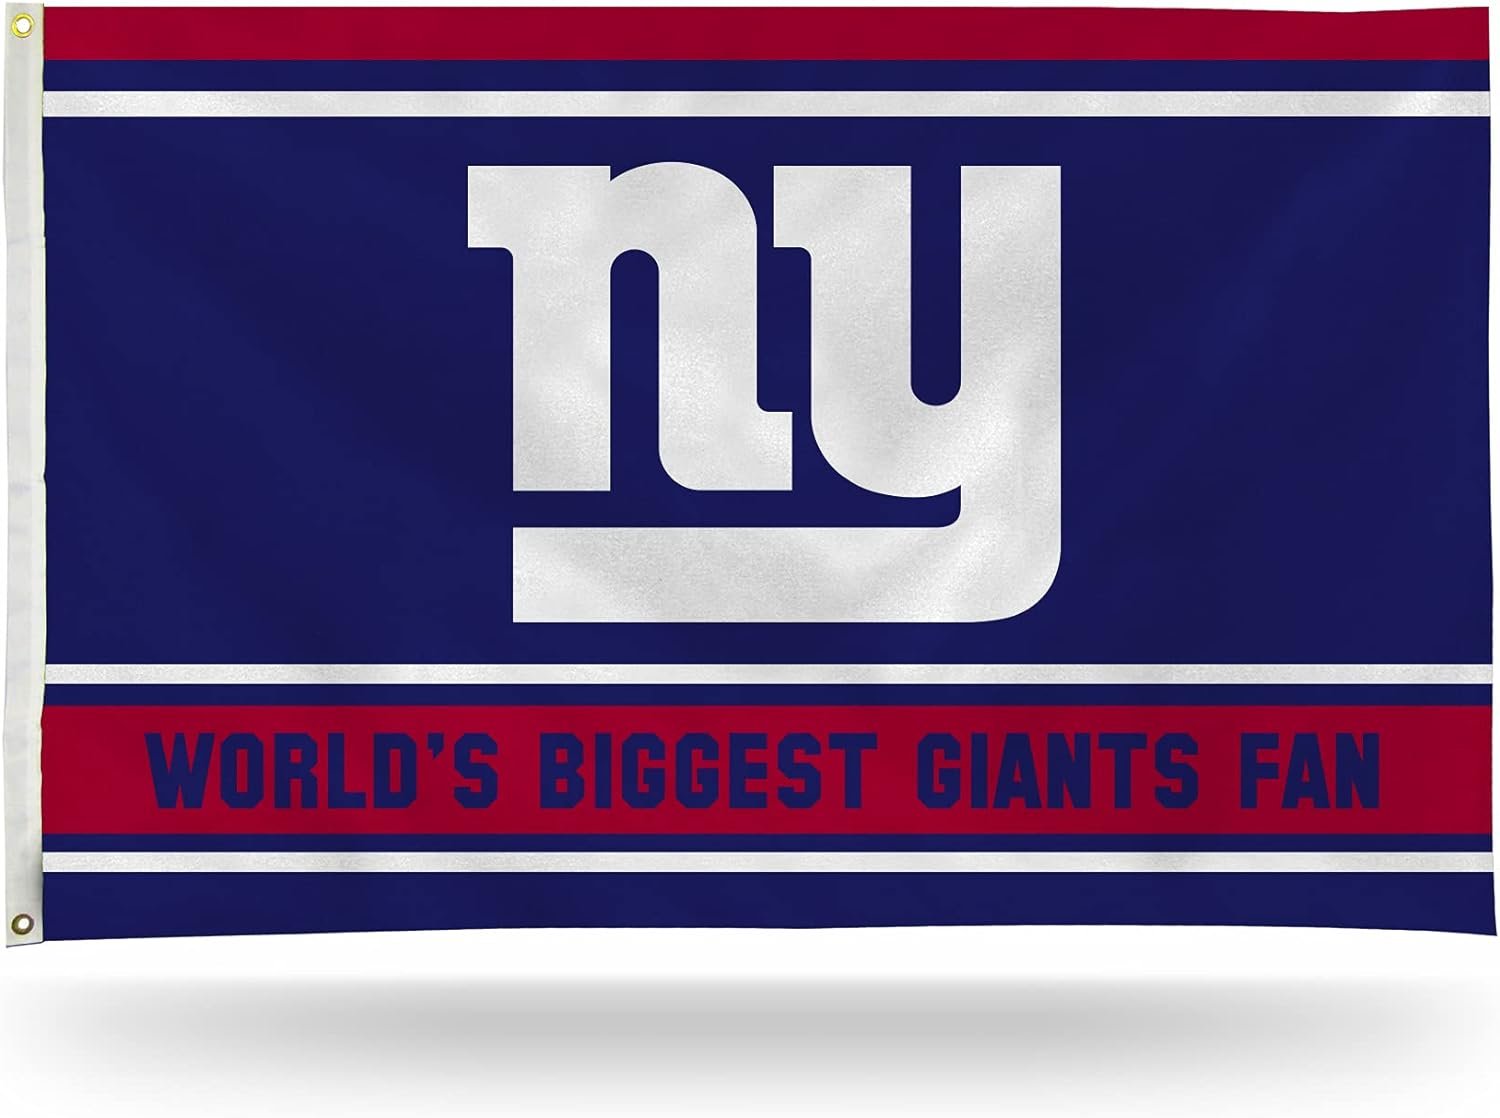 New York Giants 3x5 Feet Flag Banner, World's Biggest Fan, Metal Grommets, Single Sided, Indoor or Outdoor Use